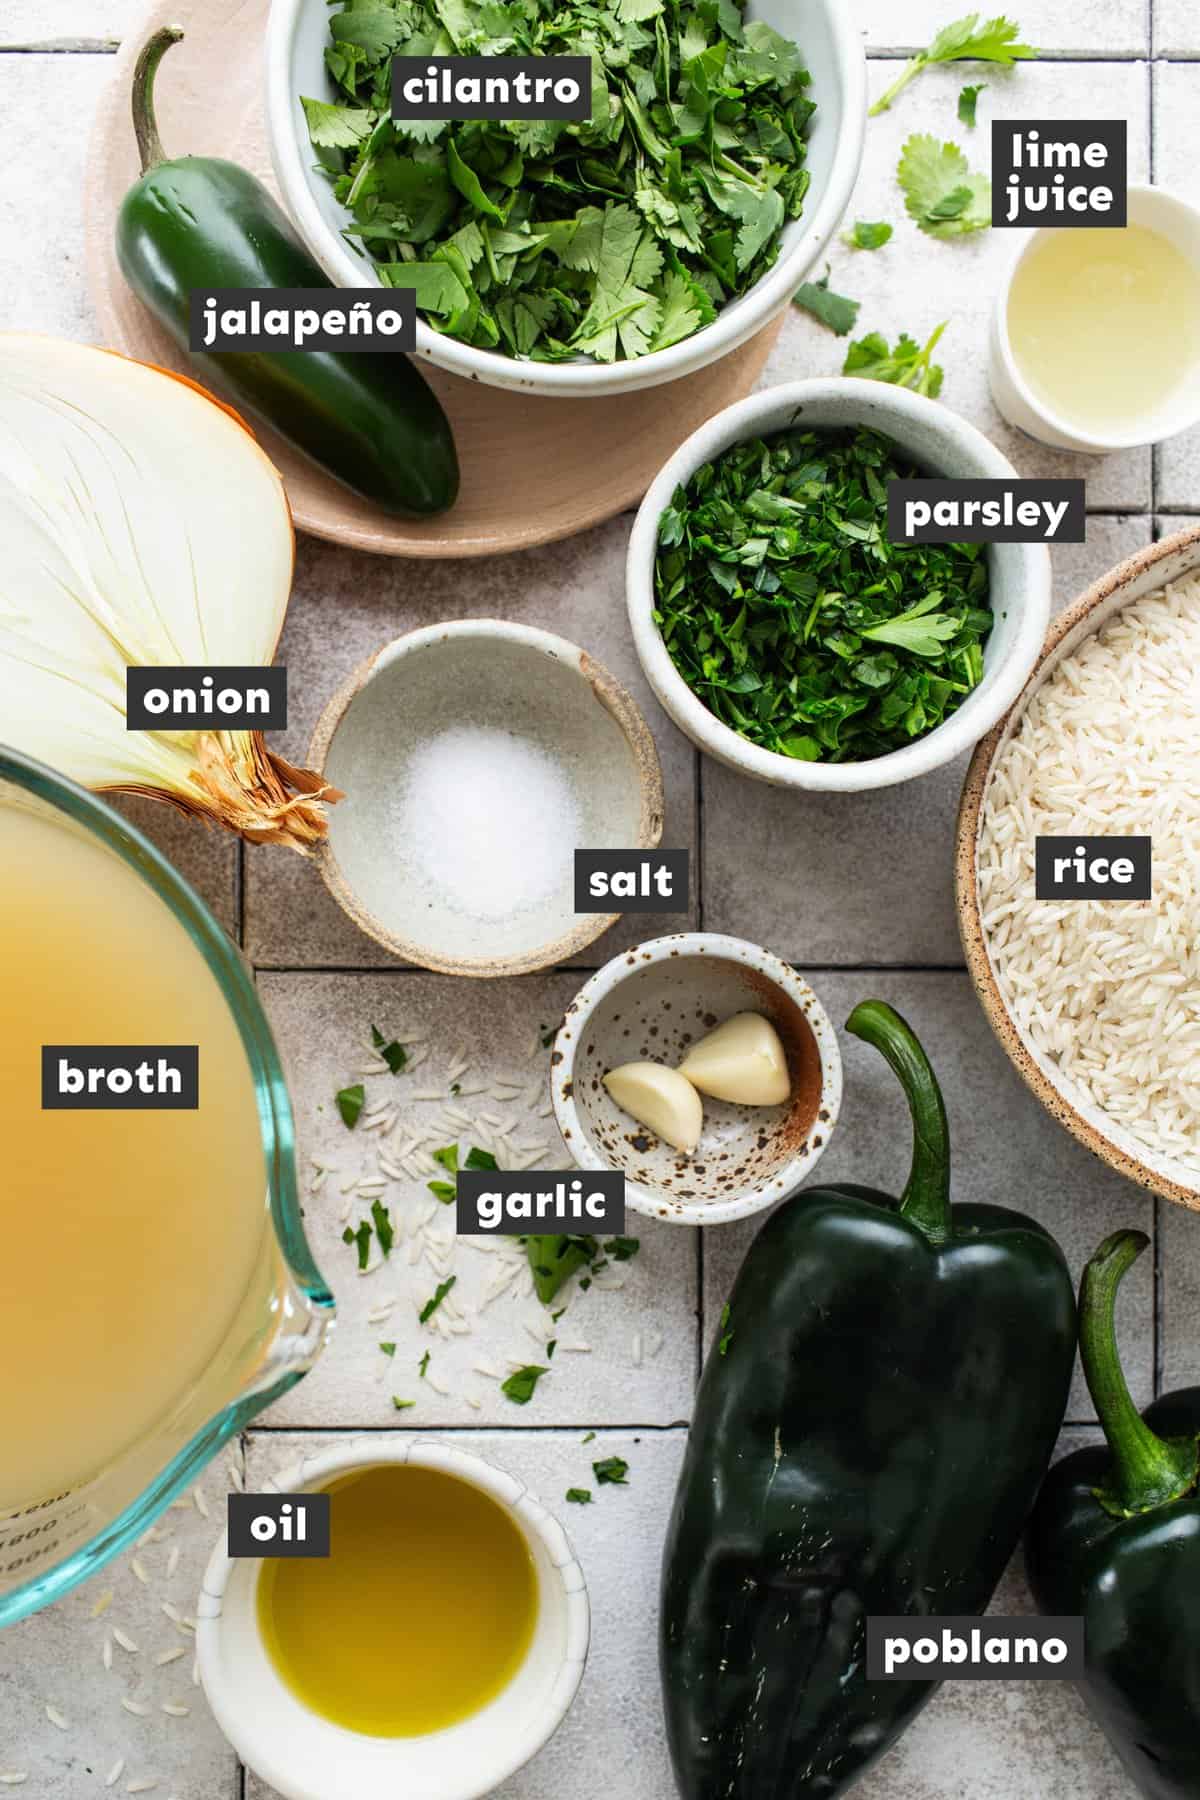 Ingredients for arroz verde on a table.